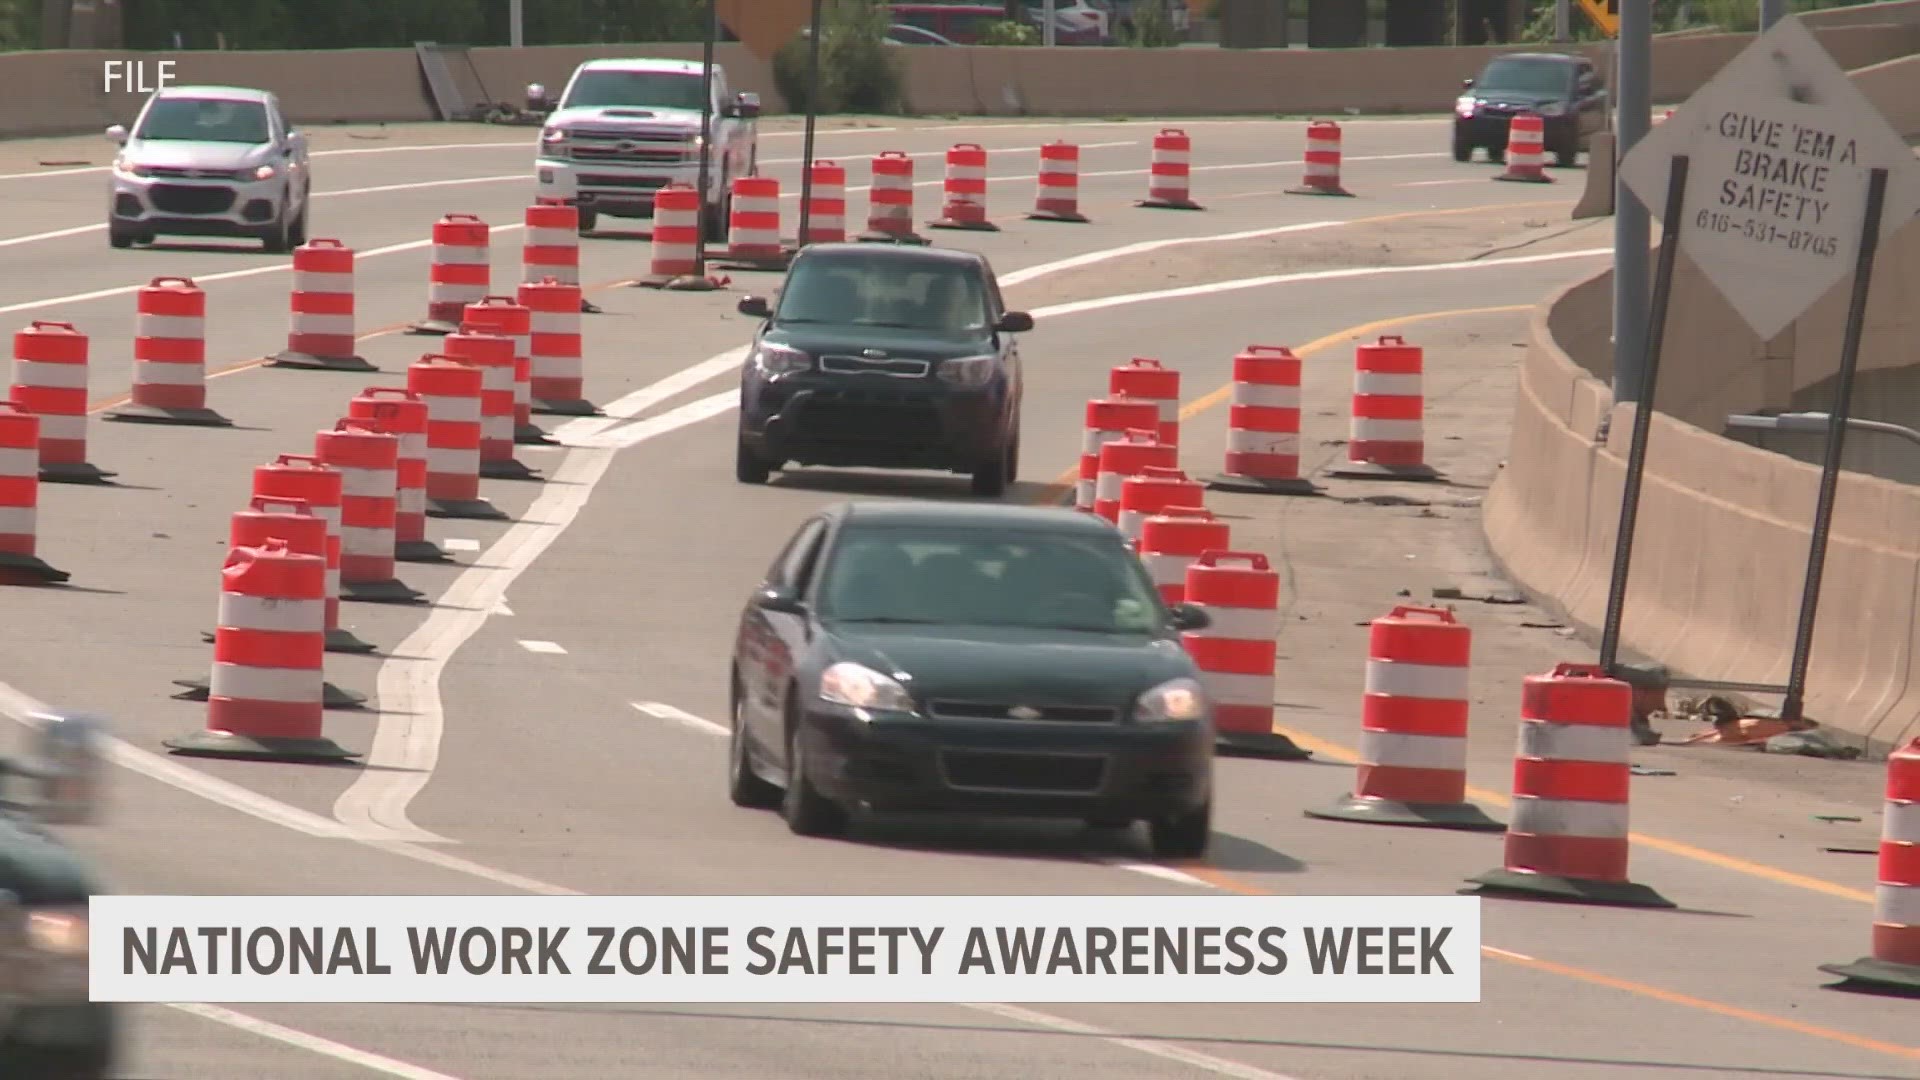 During National Work Zone Safety Awareness Week, drivers are reminded to take it slow and drive carefully in construction zones.